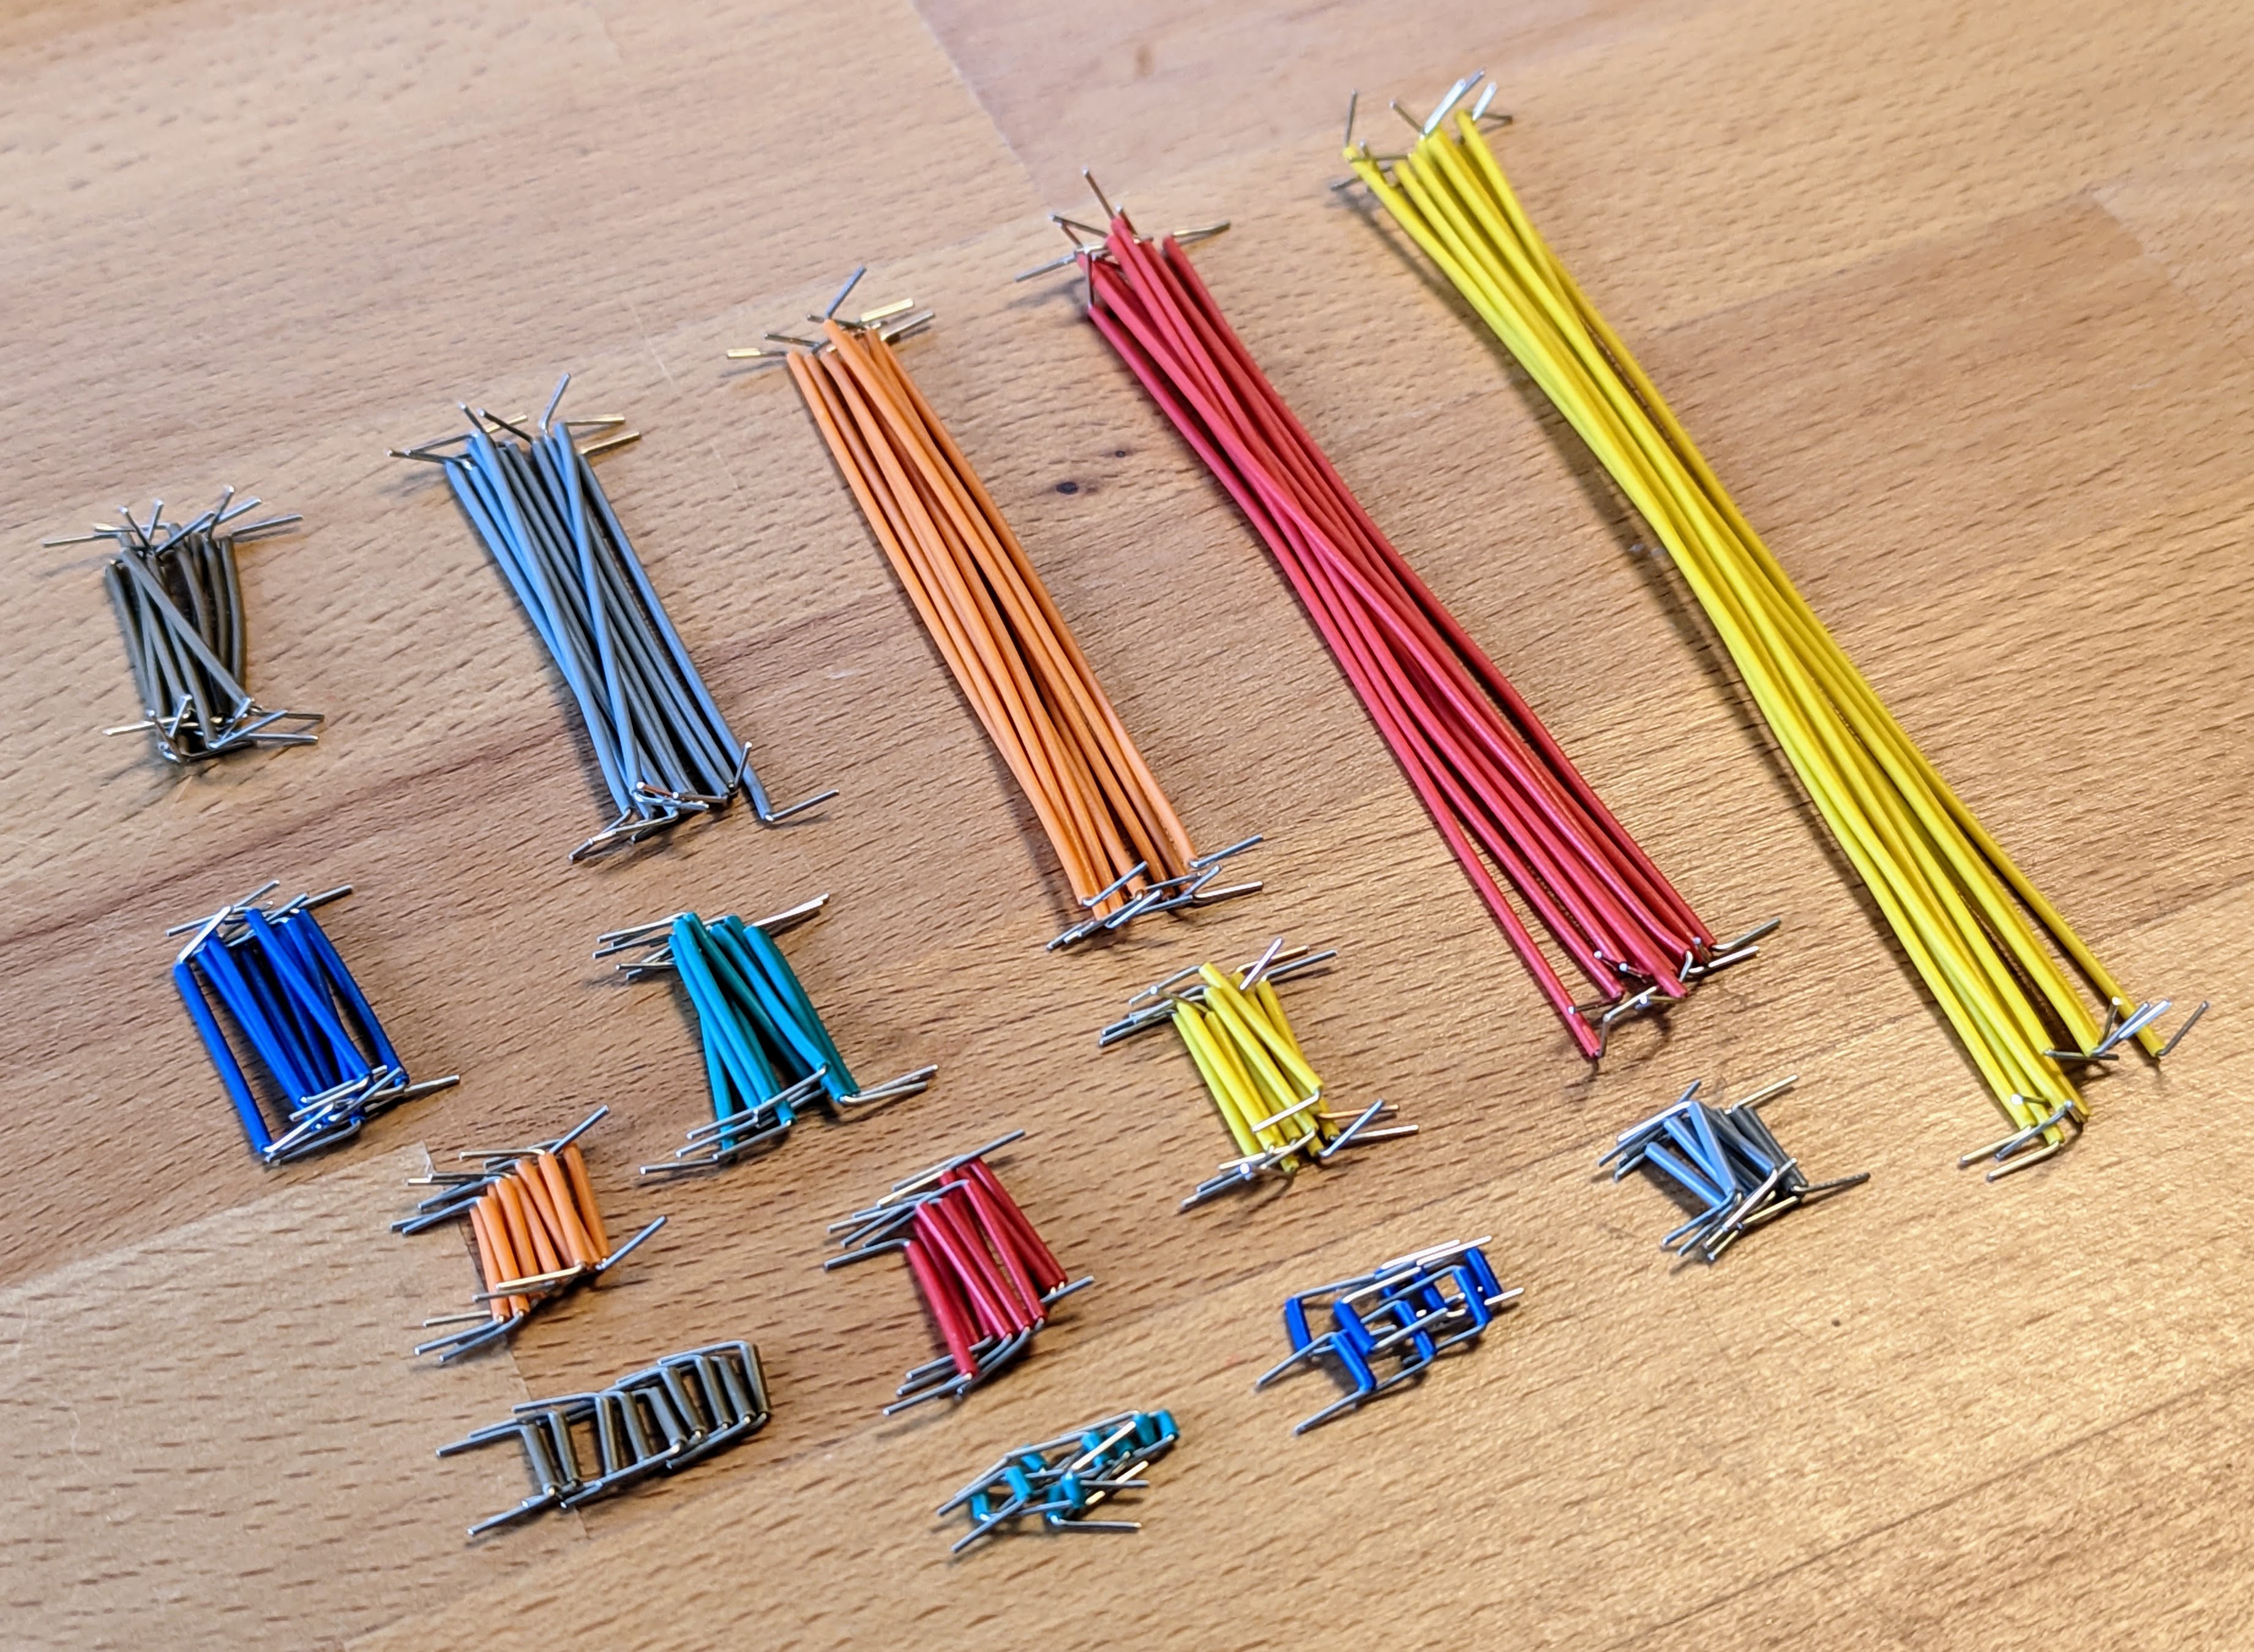 Jumper set for breadboards - 140 wires with 14 lengths